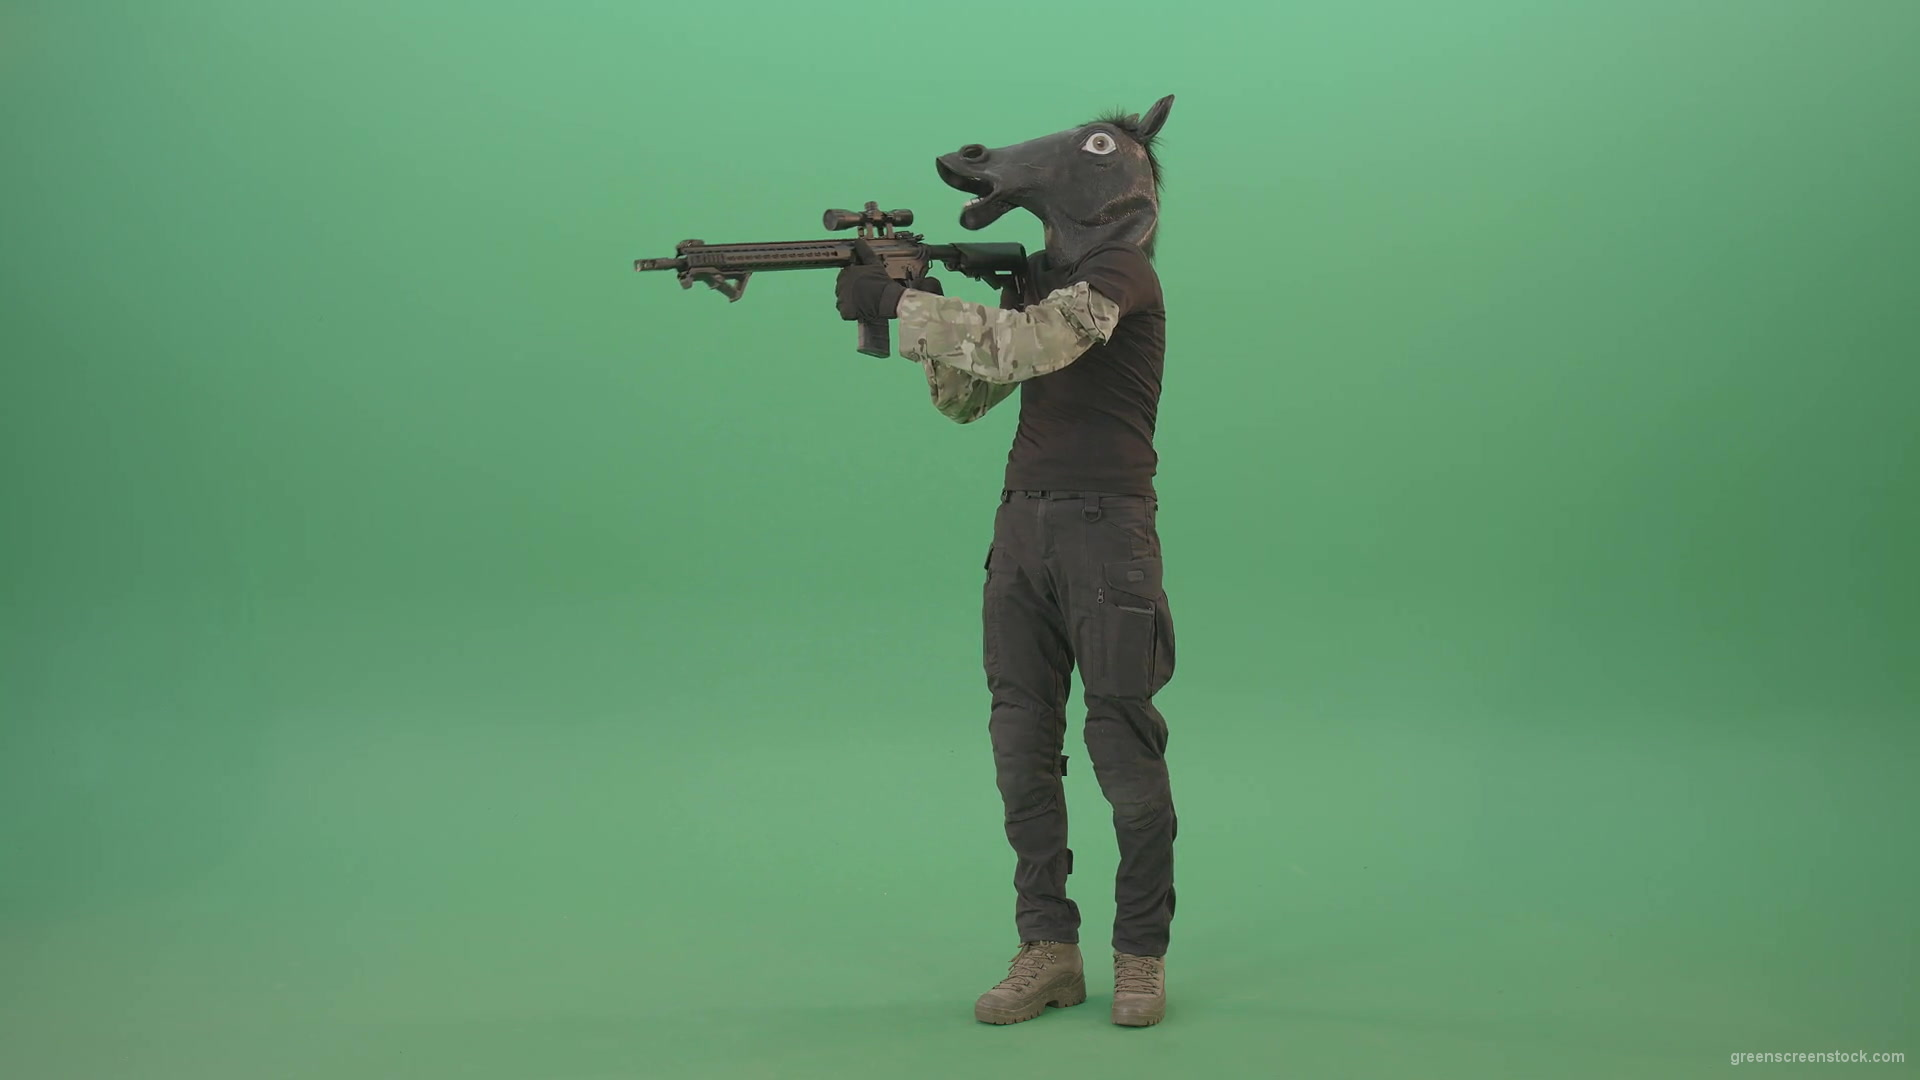 Funny-Army-Horse-Man-shooting-animals-on-Green-Screen-from-Machine-Gun-4K-Video-Footage-1920_005 Green Screen Stock